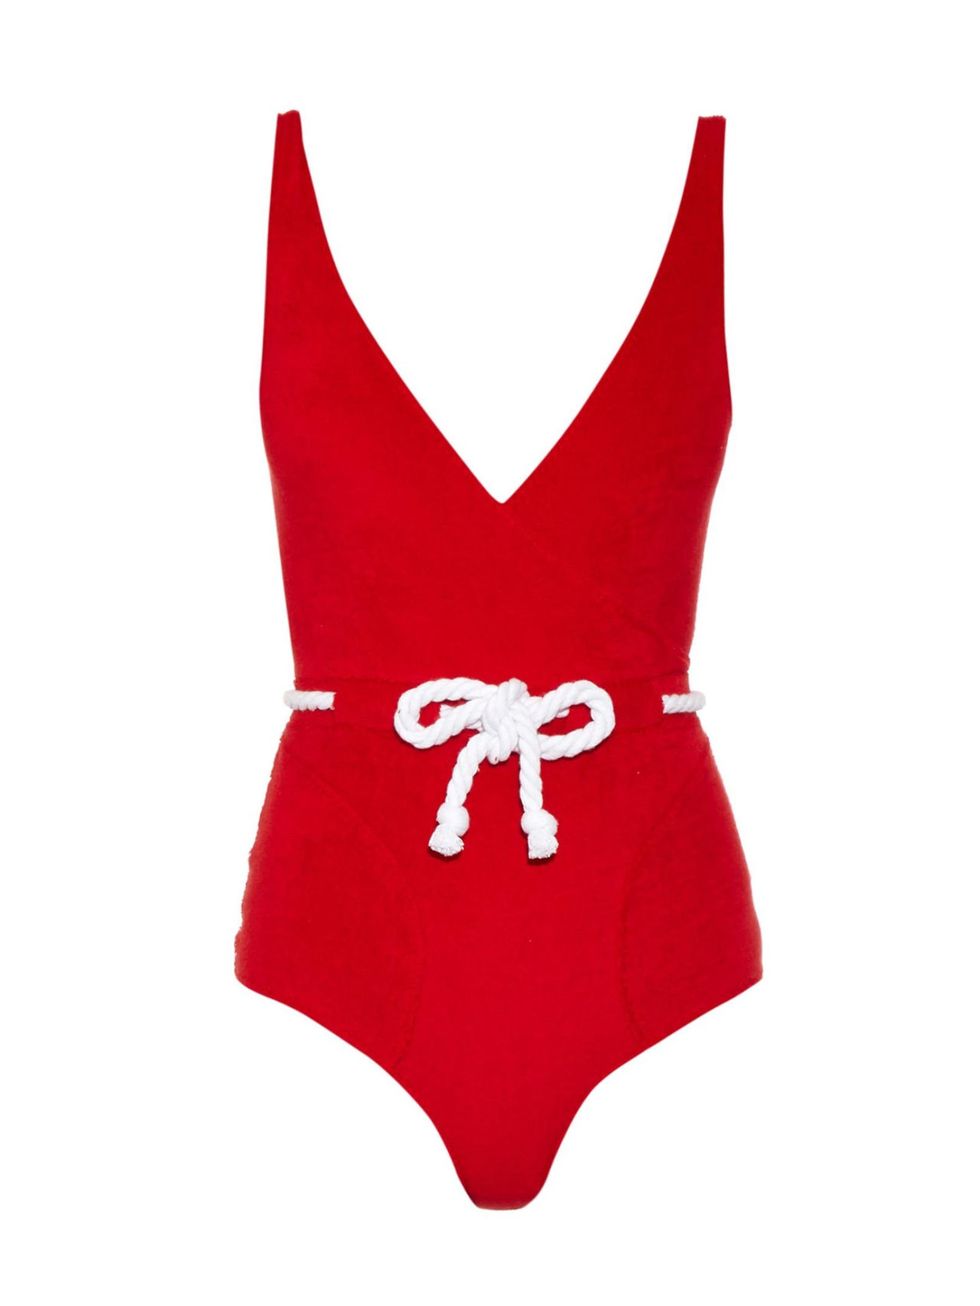 Clothing, One-piece swimsuit, Red, Swimwear, Monokini, Maillot, Lingerie top, Swimsuit bottom, 